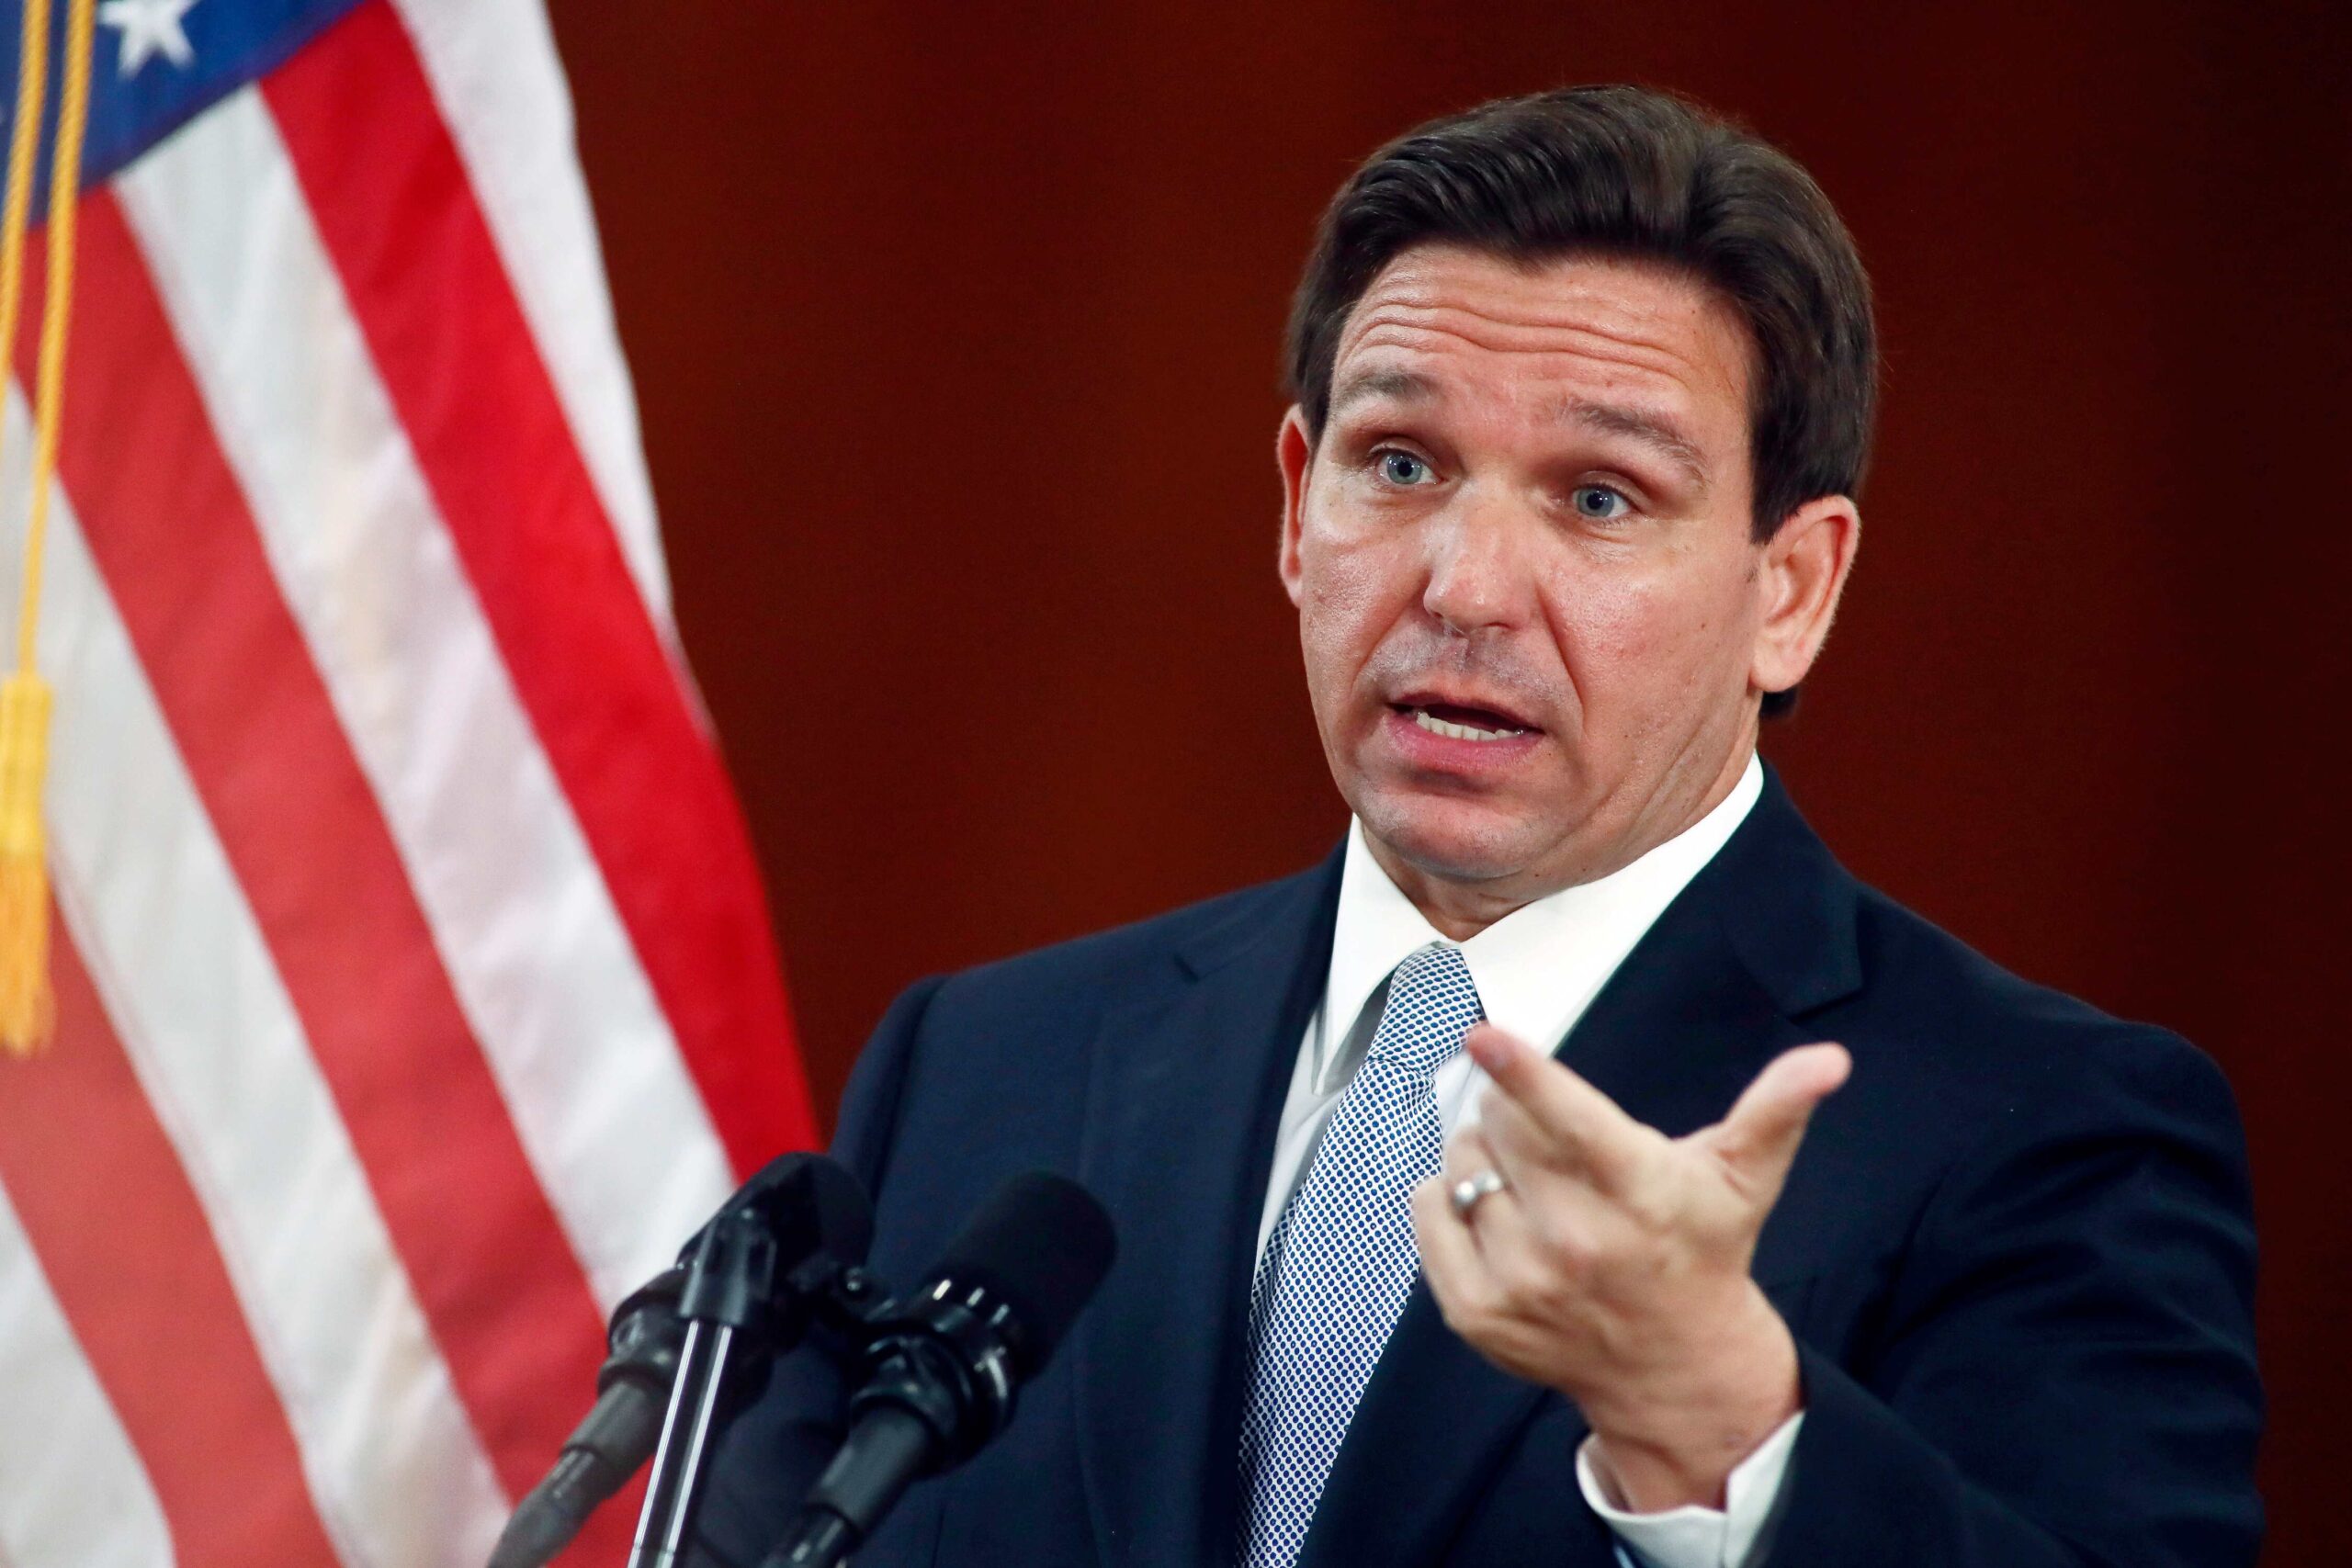 Florida Governor Ron DeSantis is deploying 250 law enforcement officers and a fleet of aircraft and boats to stop an "influx of illegal immigration” from Haiti.